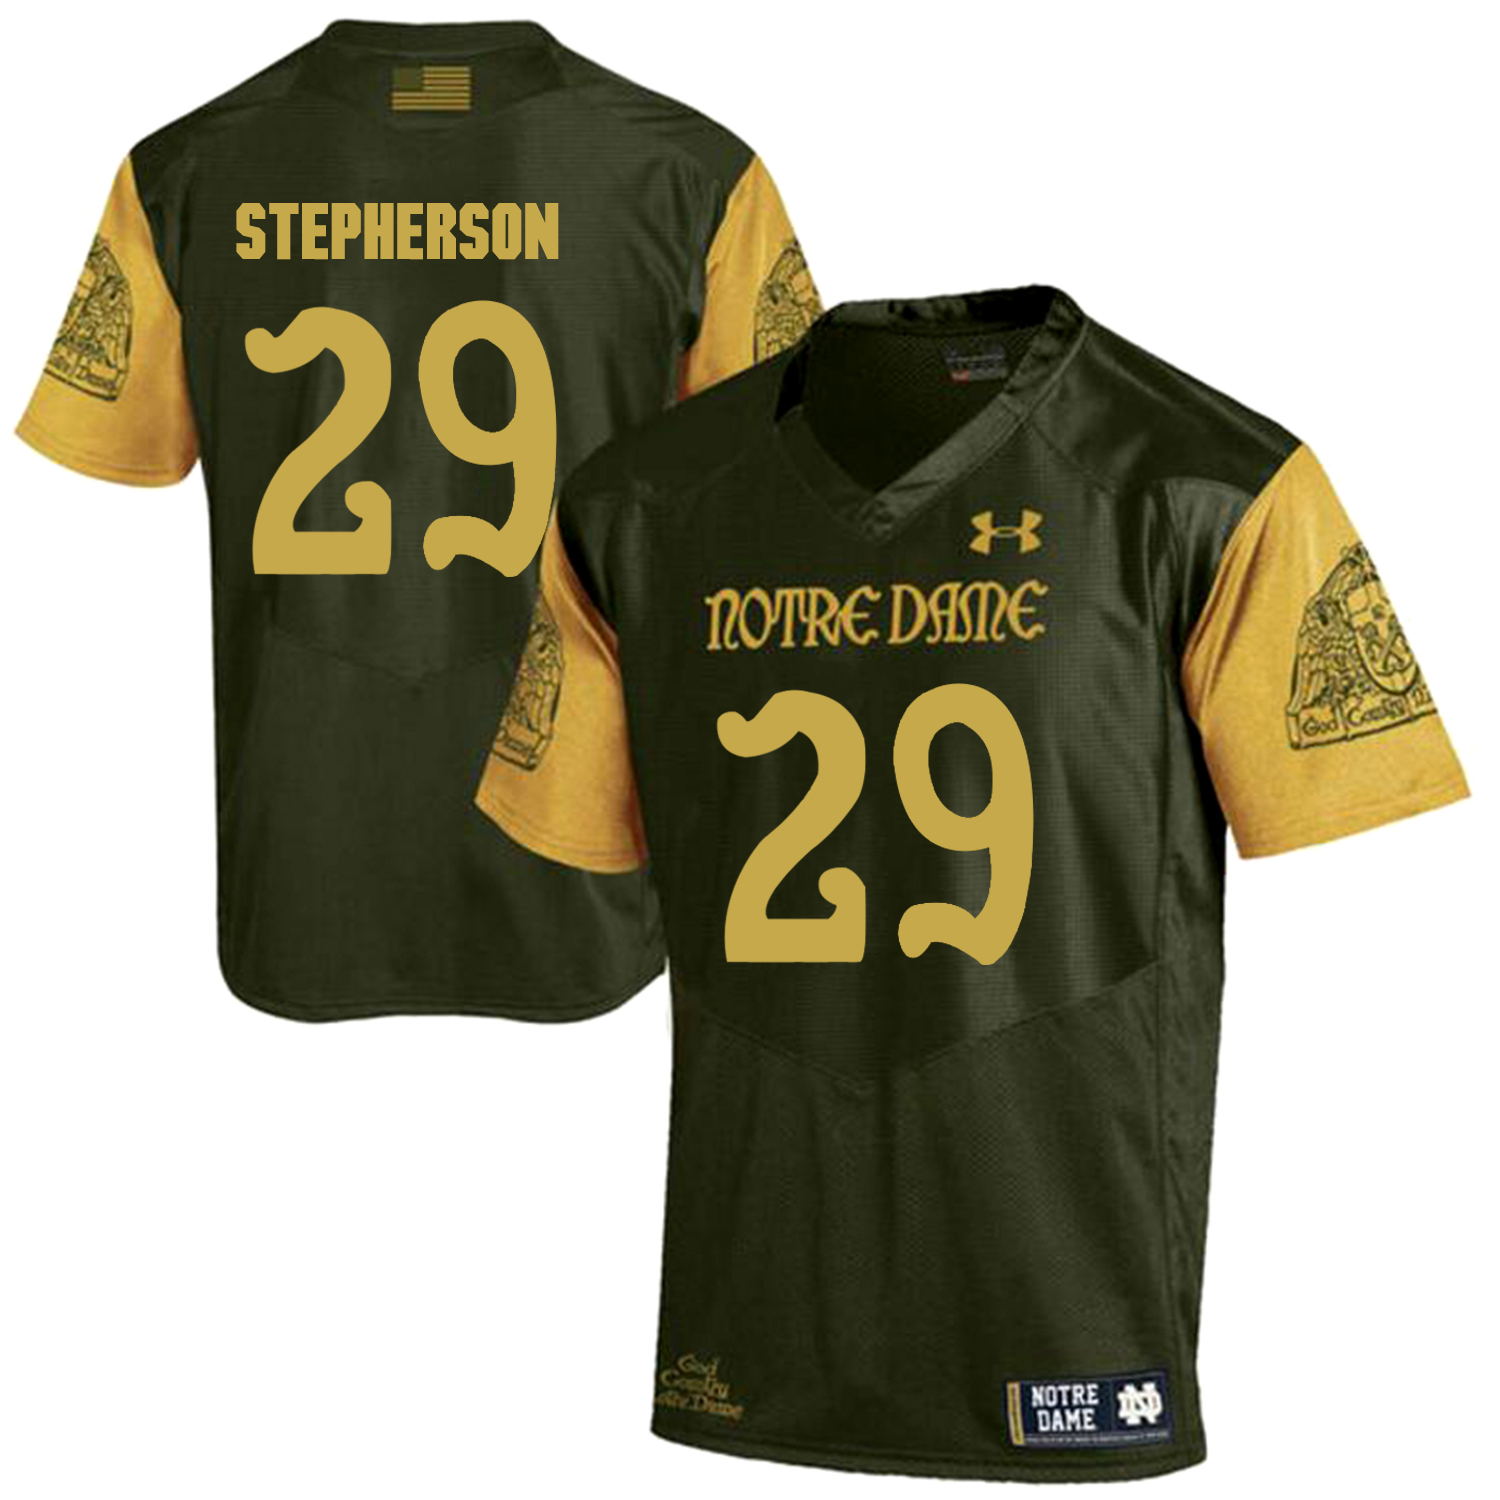 Notre Dame Fighting Irish 29 Kevin Stepherson Olive Green College Football Jersey